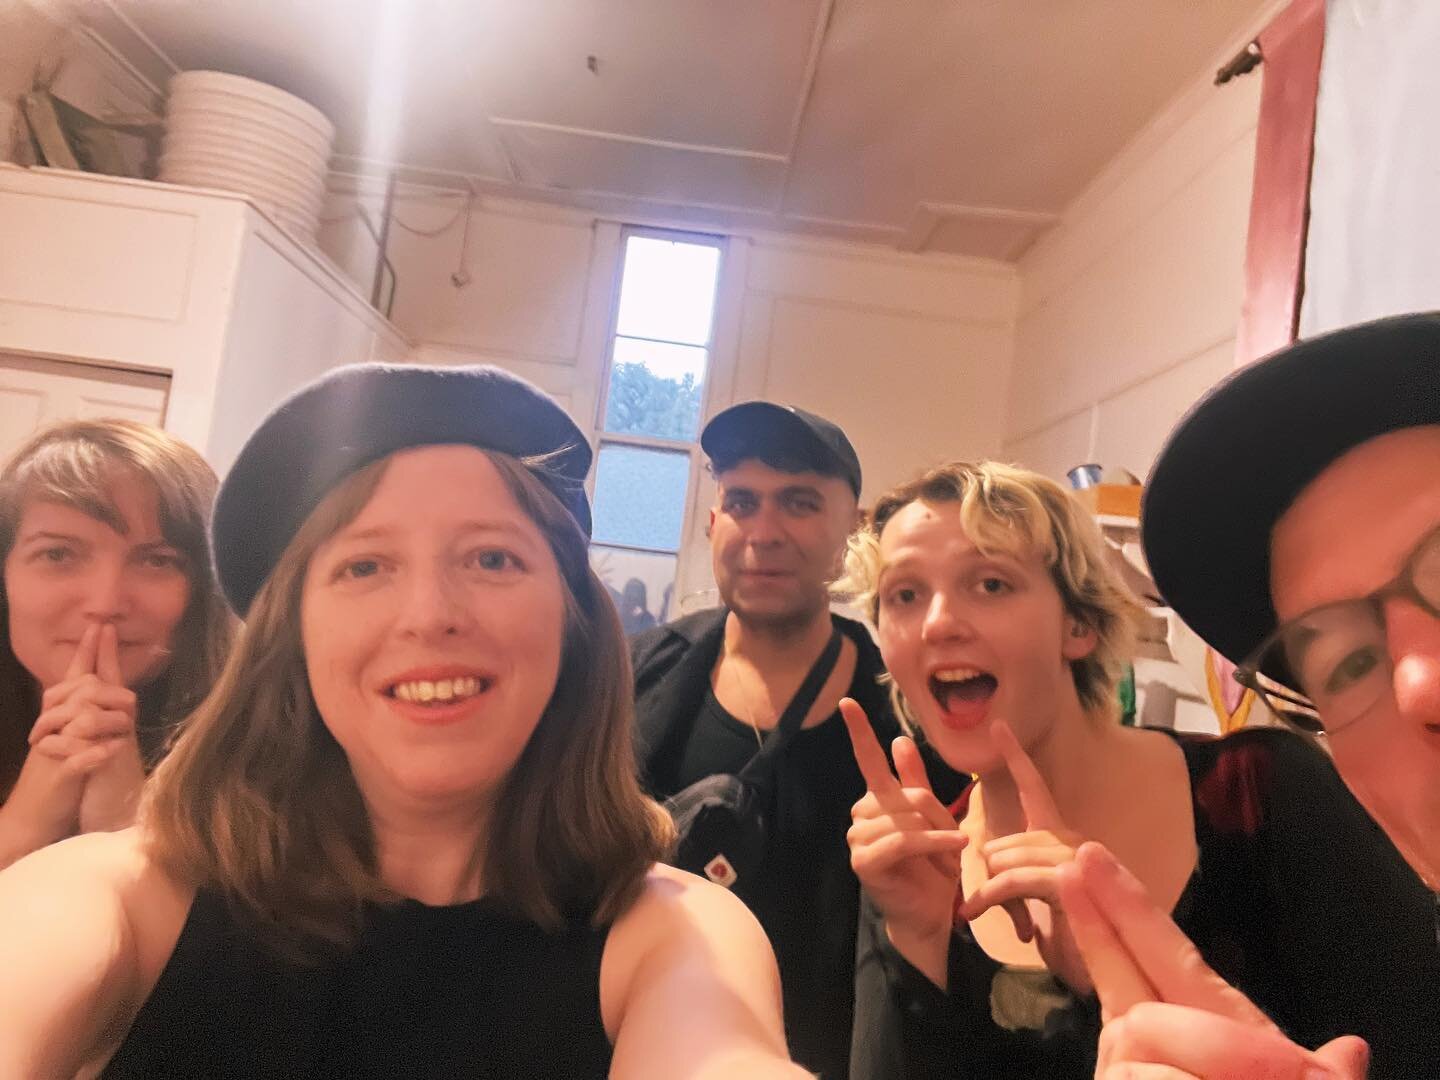 Thank you Whanganui and @sarjeantgallery for a beautiful sold out show. We had a blast getting to share these songs in this format with strings.

Tonight we play on Waiheke Island, kicks off at 8pm! 
Don&rsquo;t miss it, it&rsquo;ll be a special one!